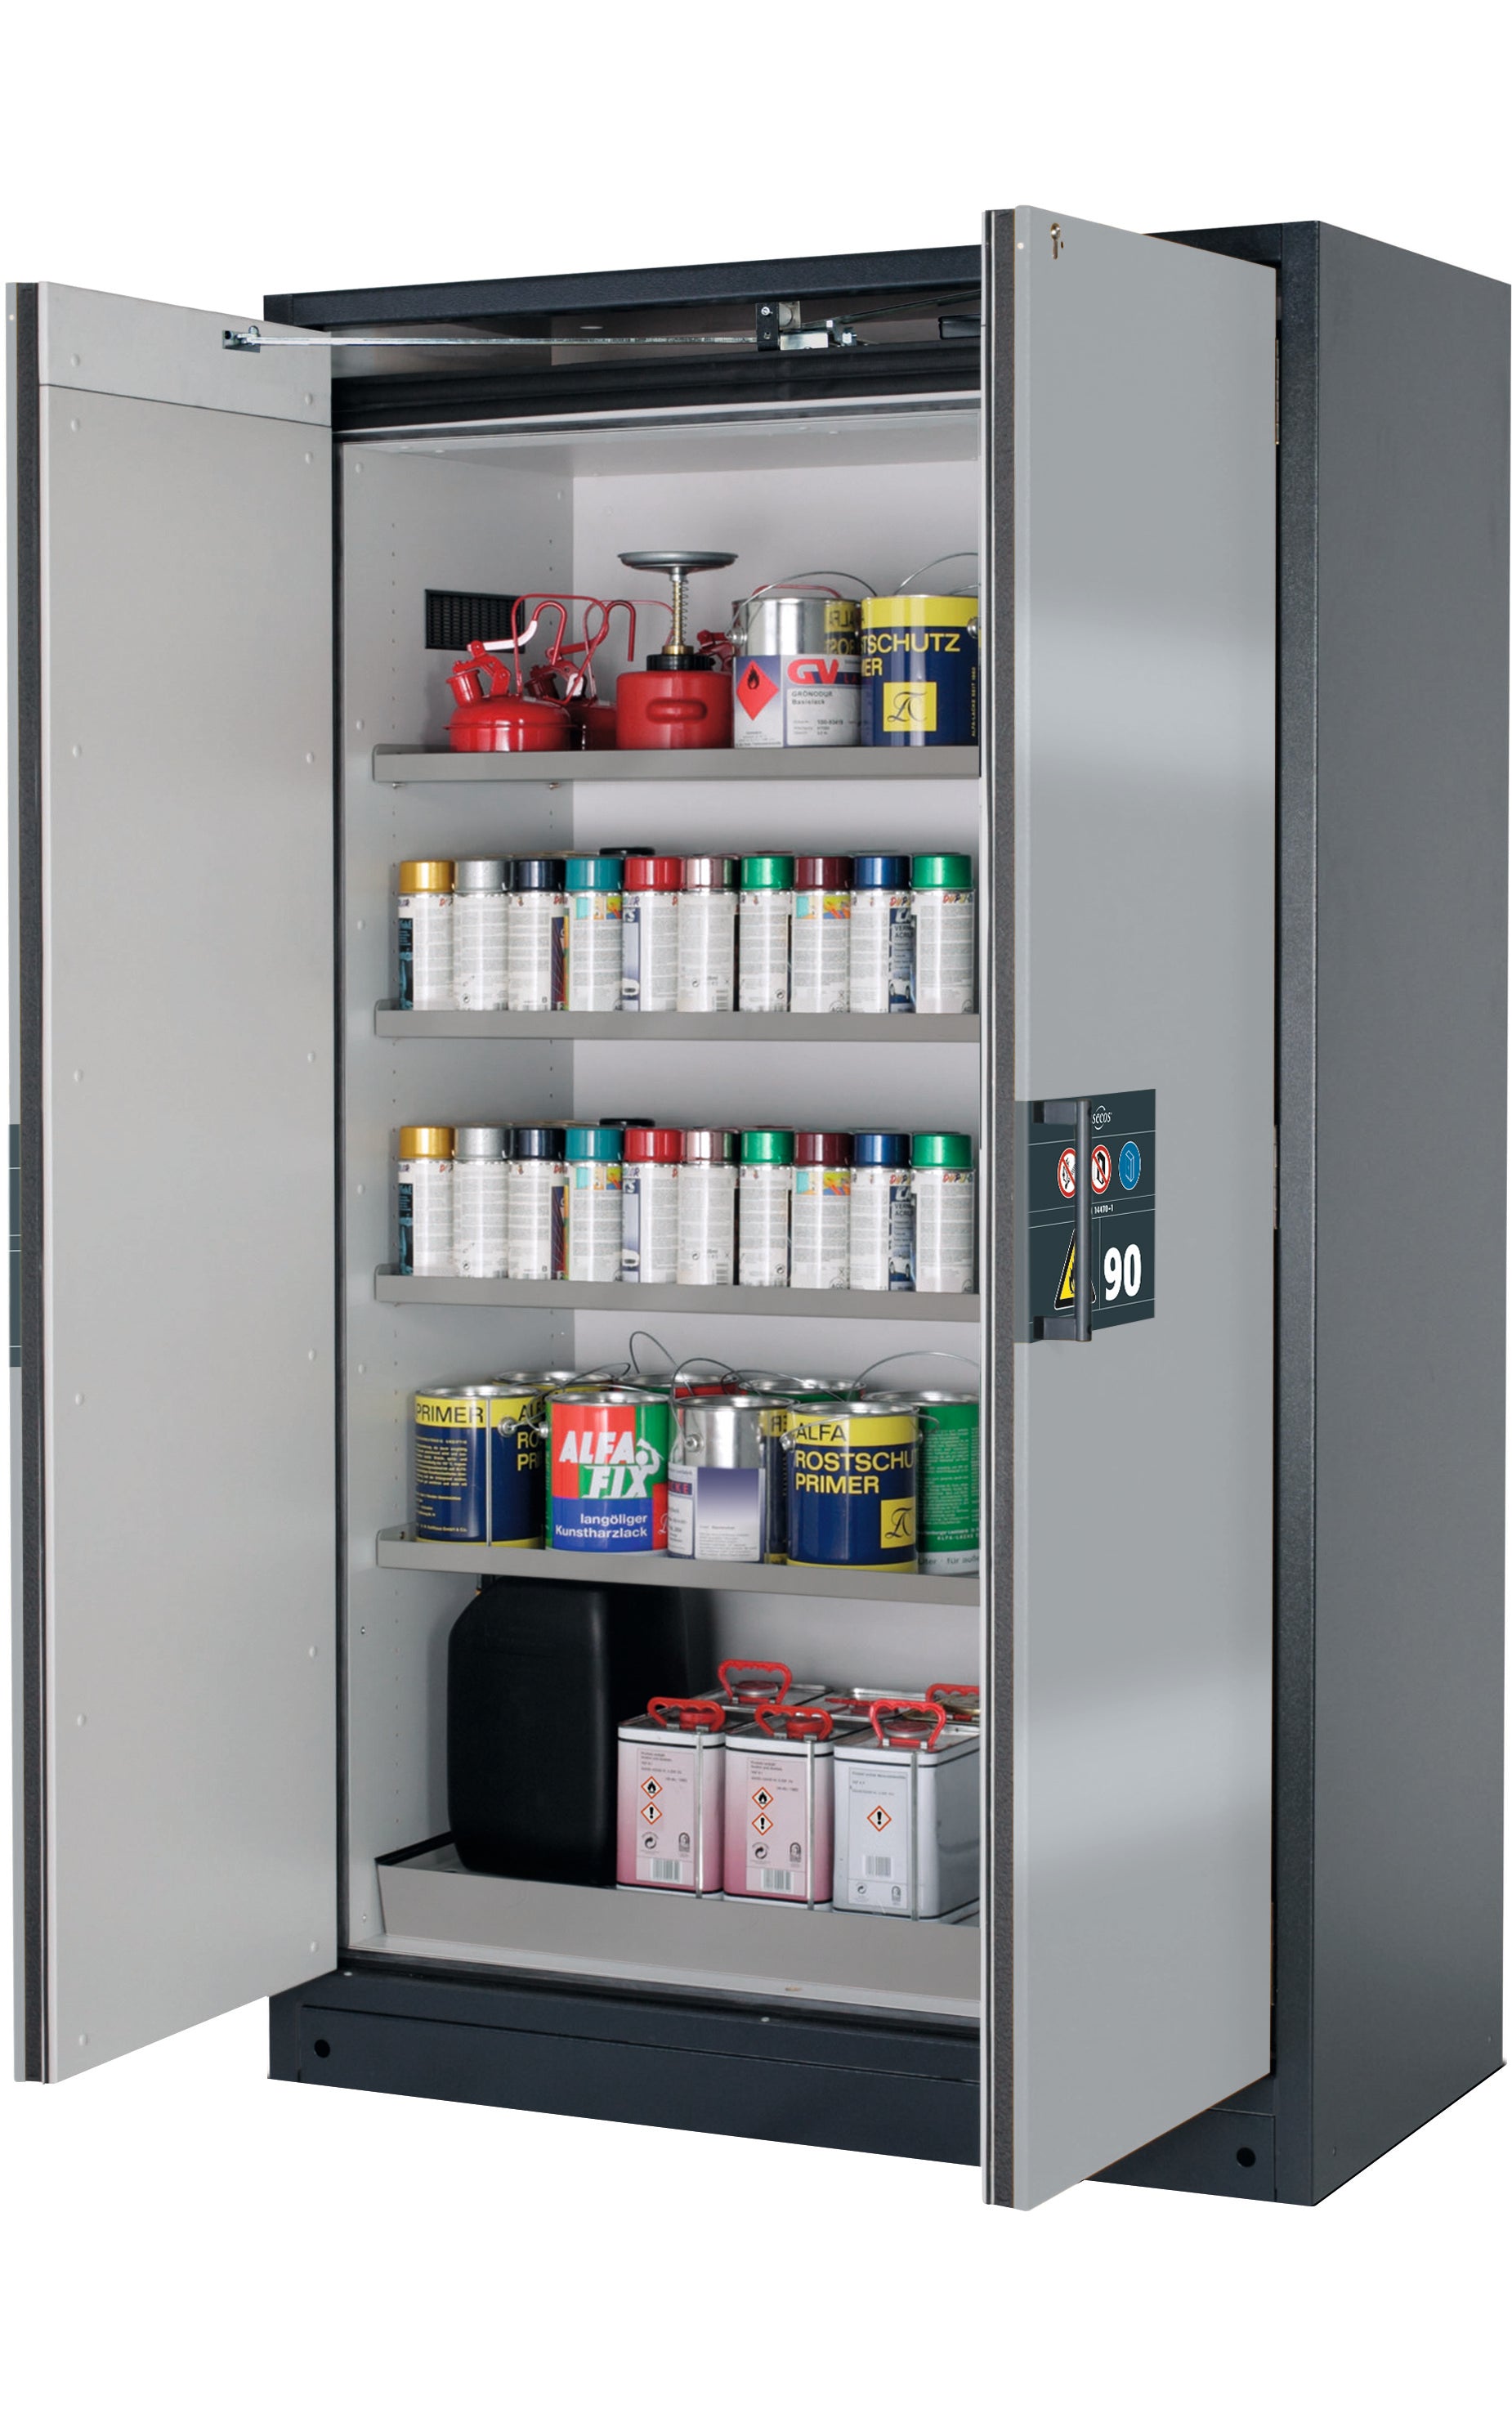 Type 90 safety storage cabinet Q-PEGASUS-90 model Q90.195.120.WDAC in asecos silver with 4x shelf standard (stainless steel 1.4301),